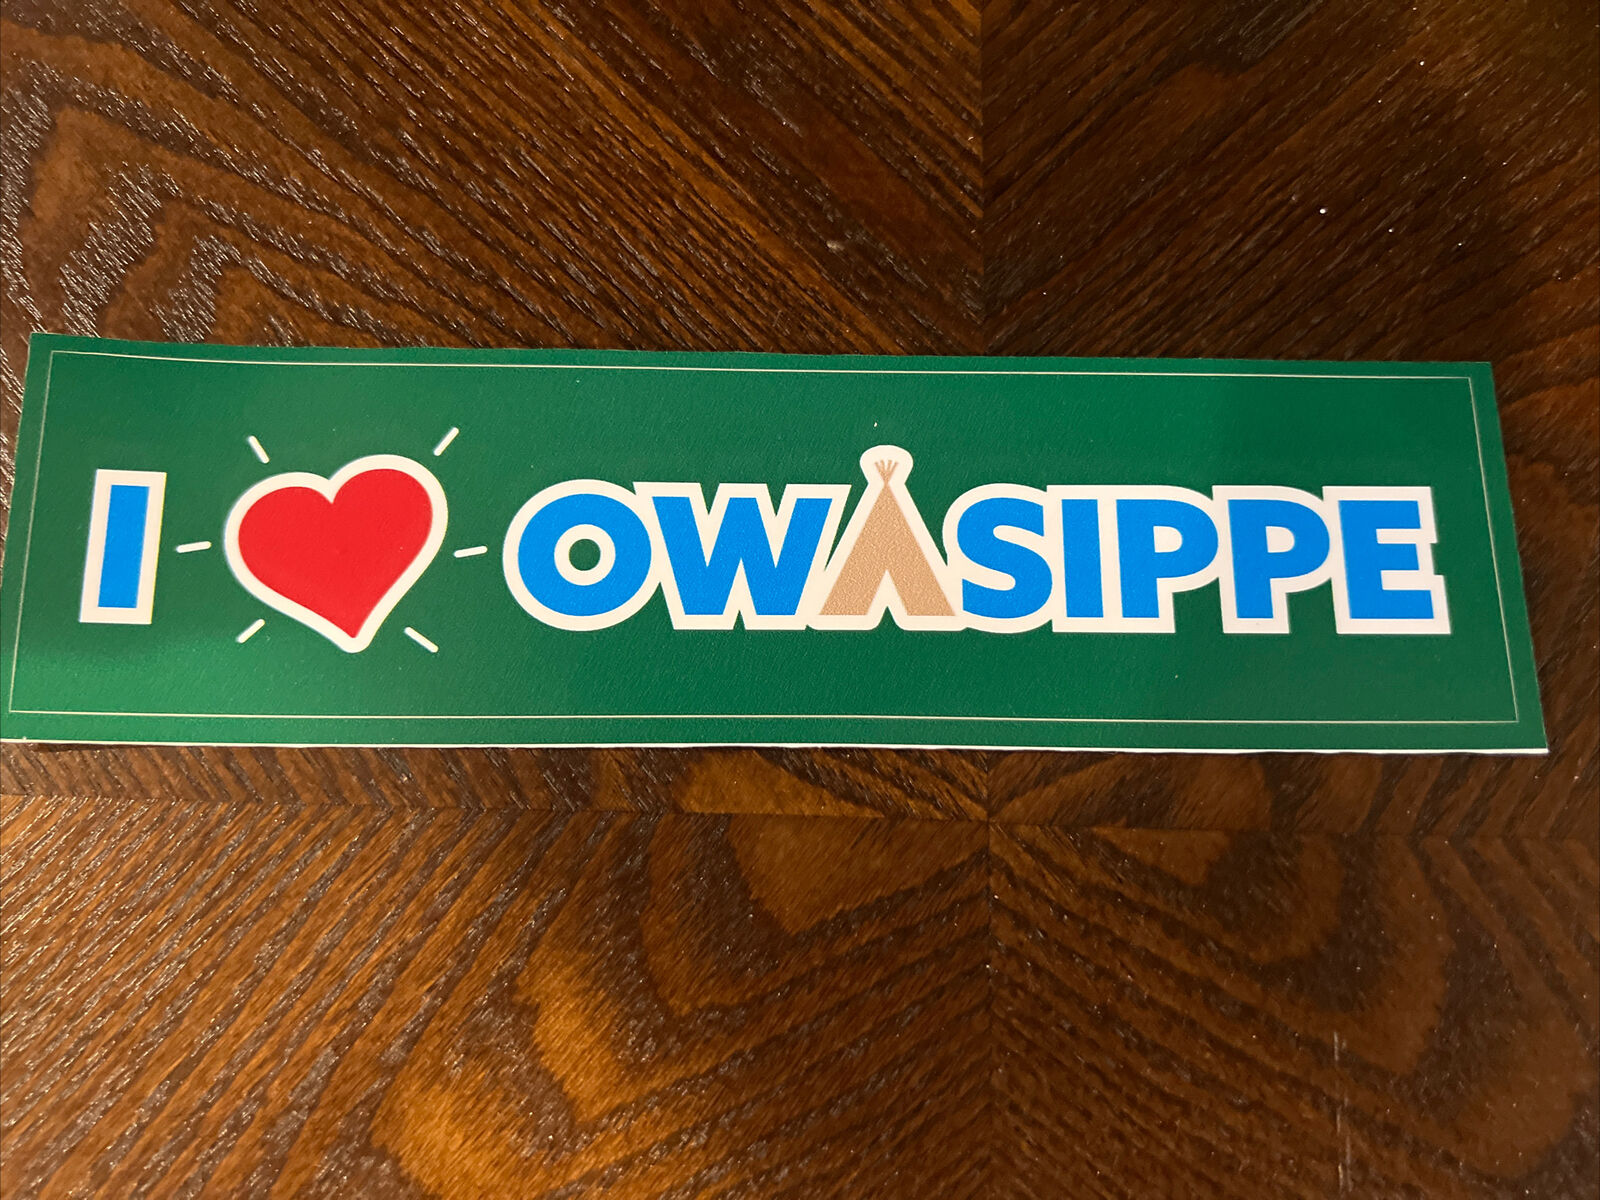 Owasippe Scout Camp Reservation I ❤️ Owasippe Bumper Sticker